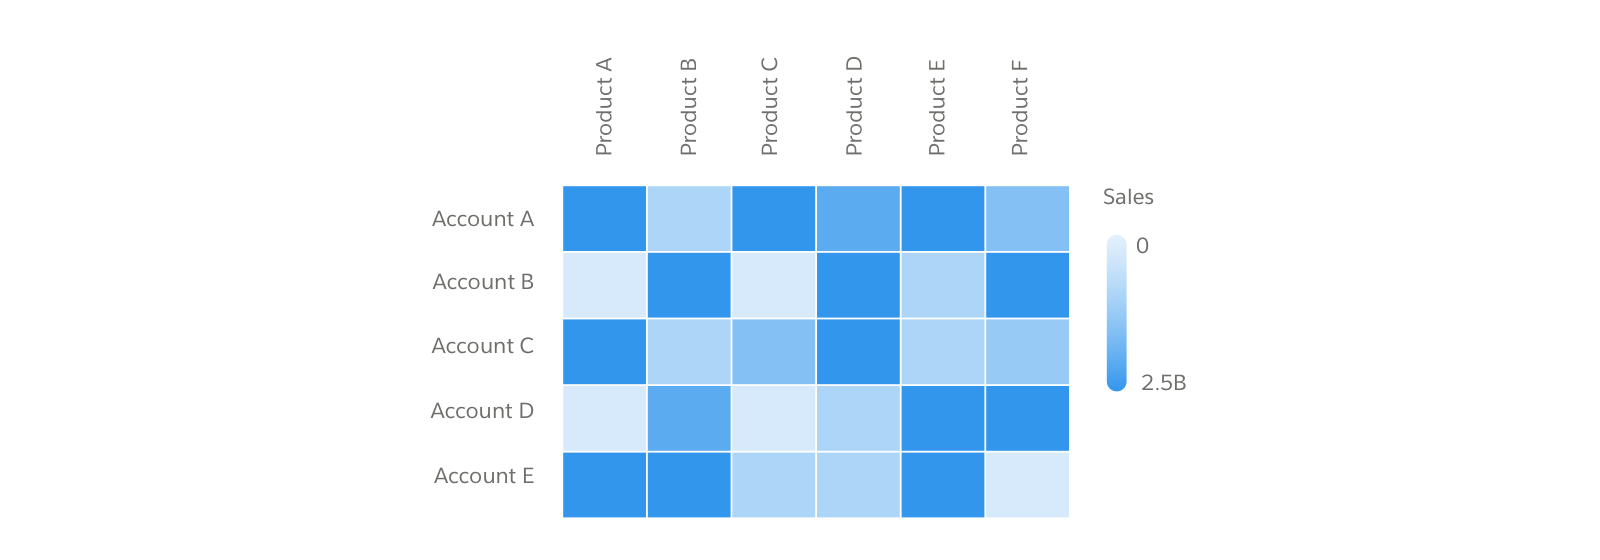 A Heatmap displaying Sales by Account and Product 